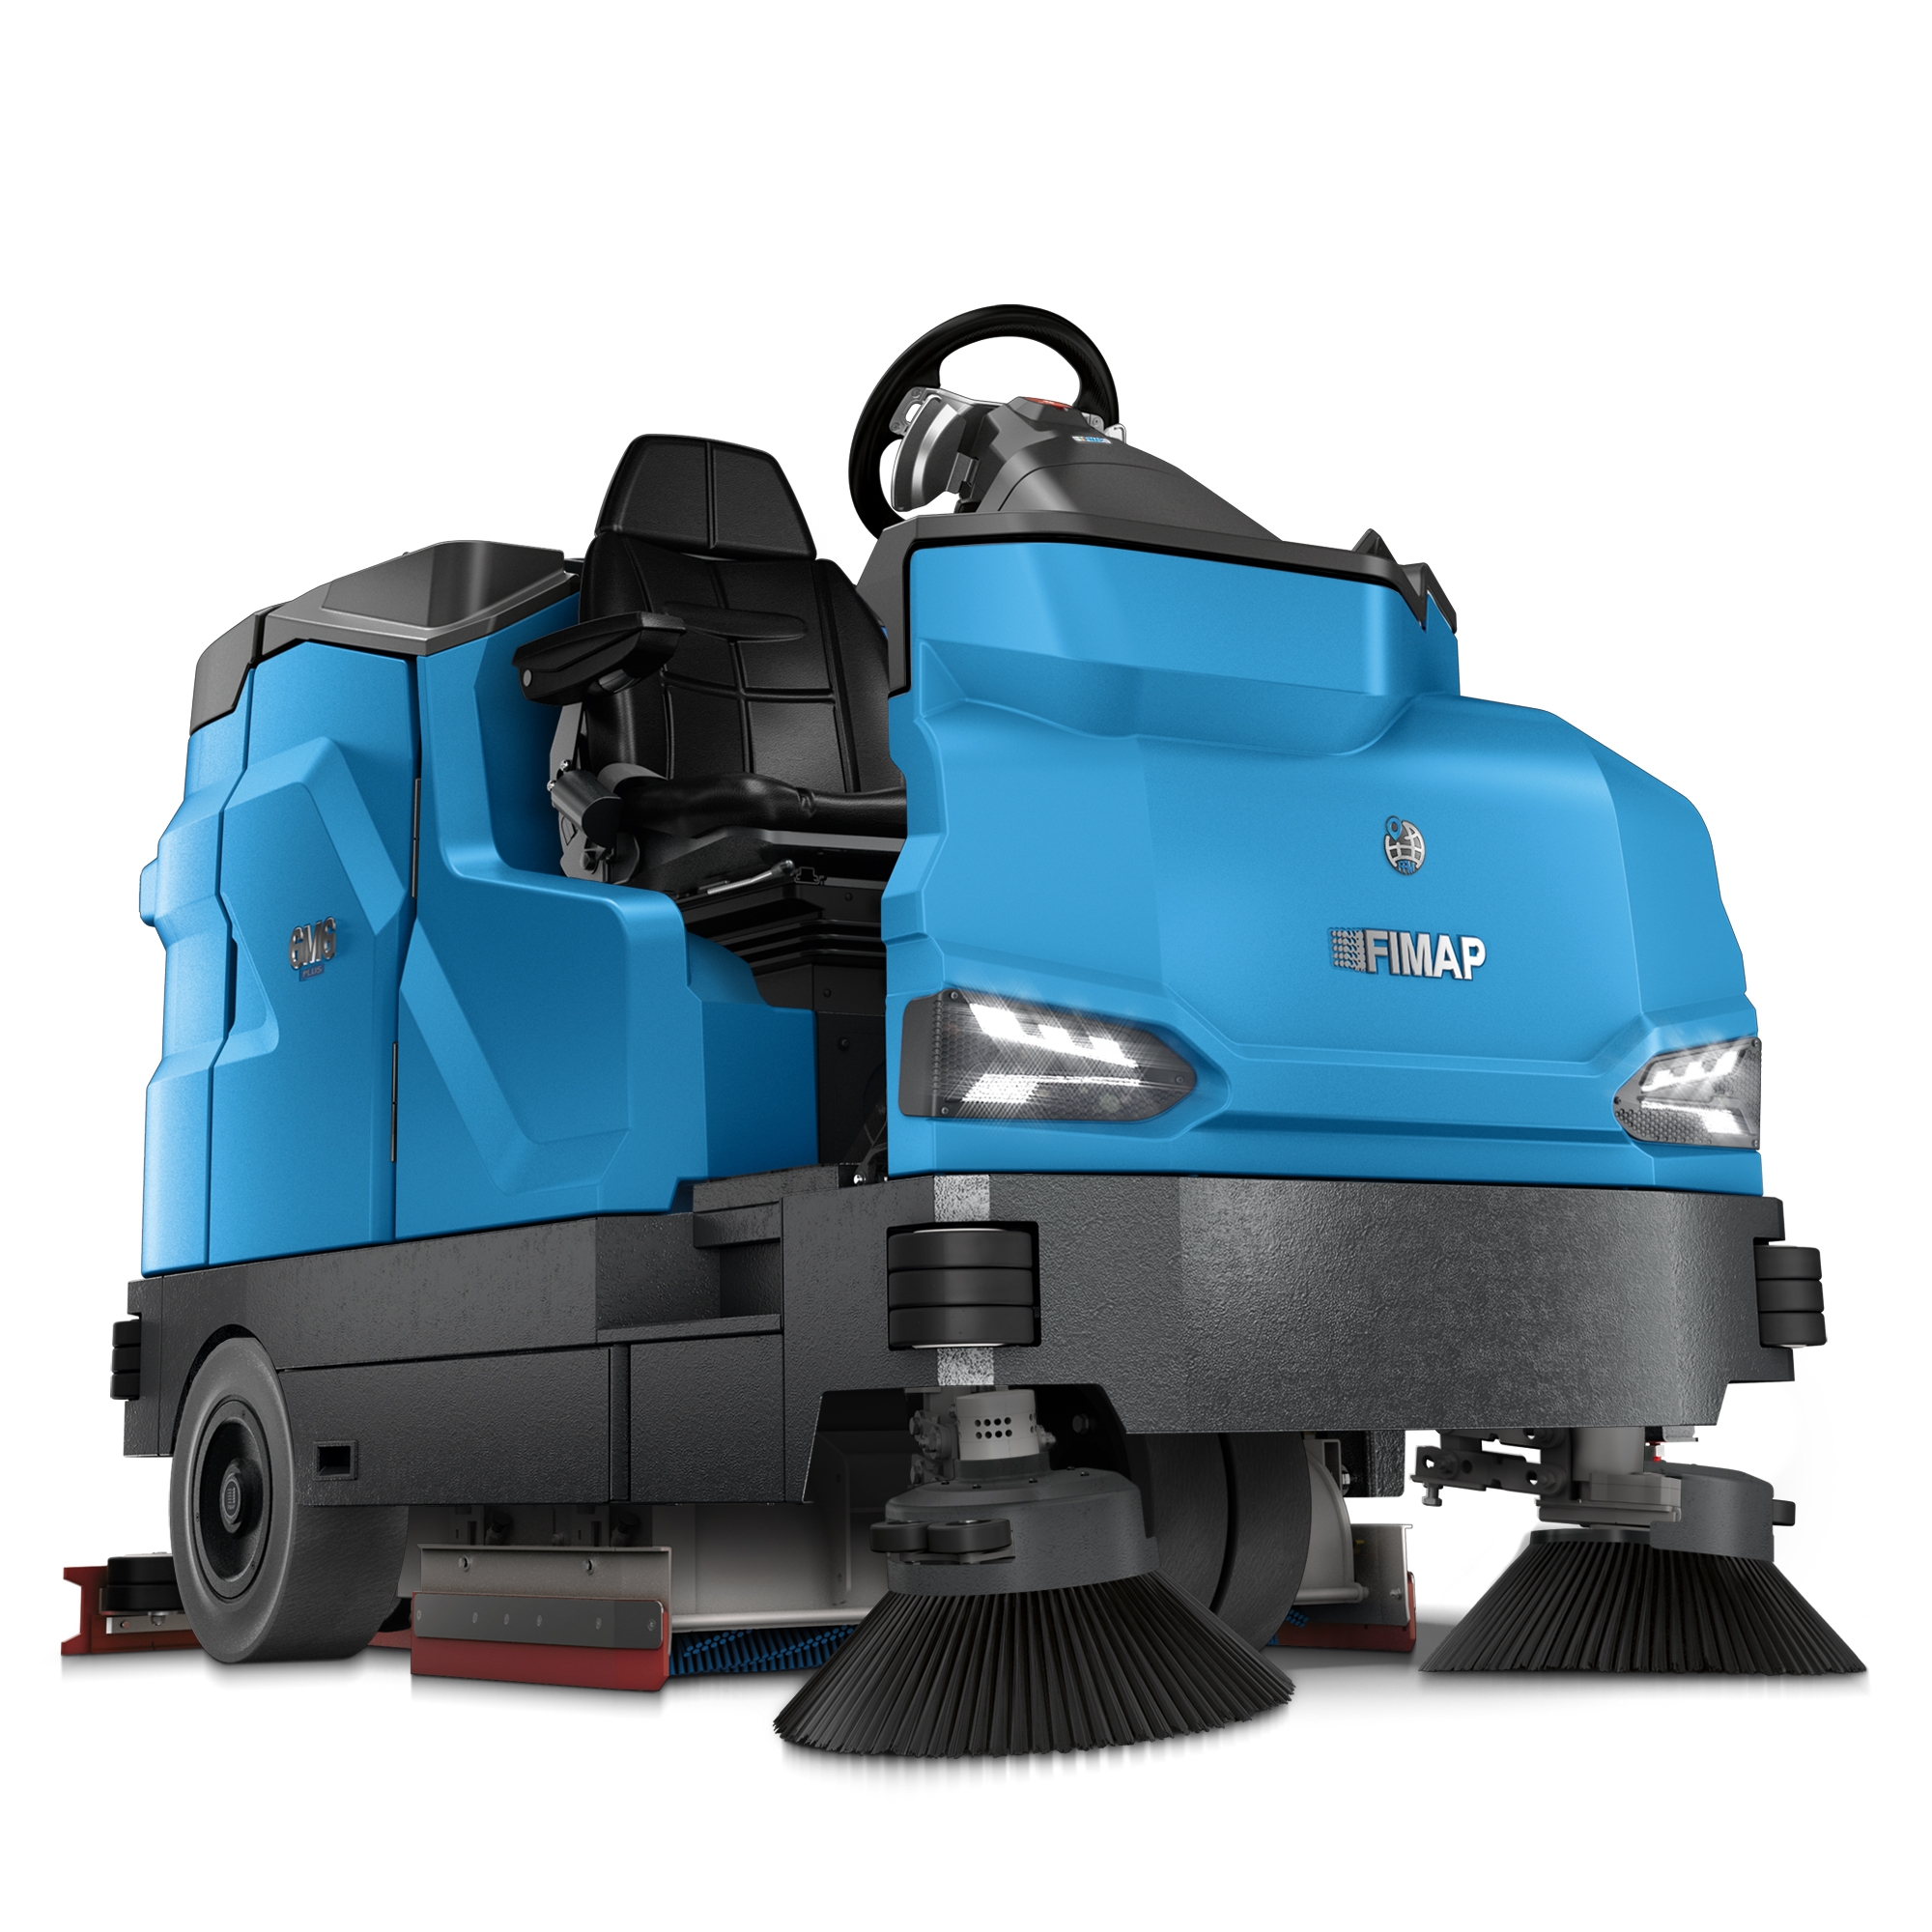 GMG floor cleaning machine in front of white background